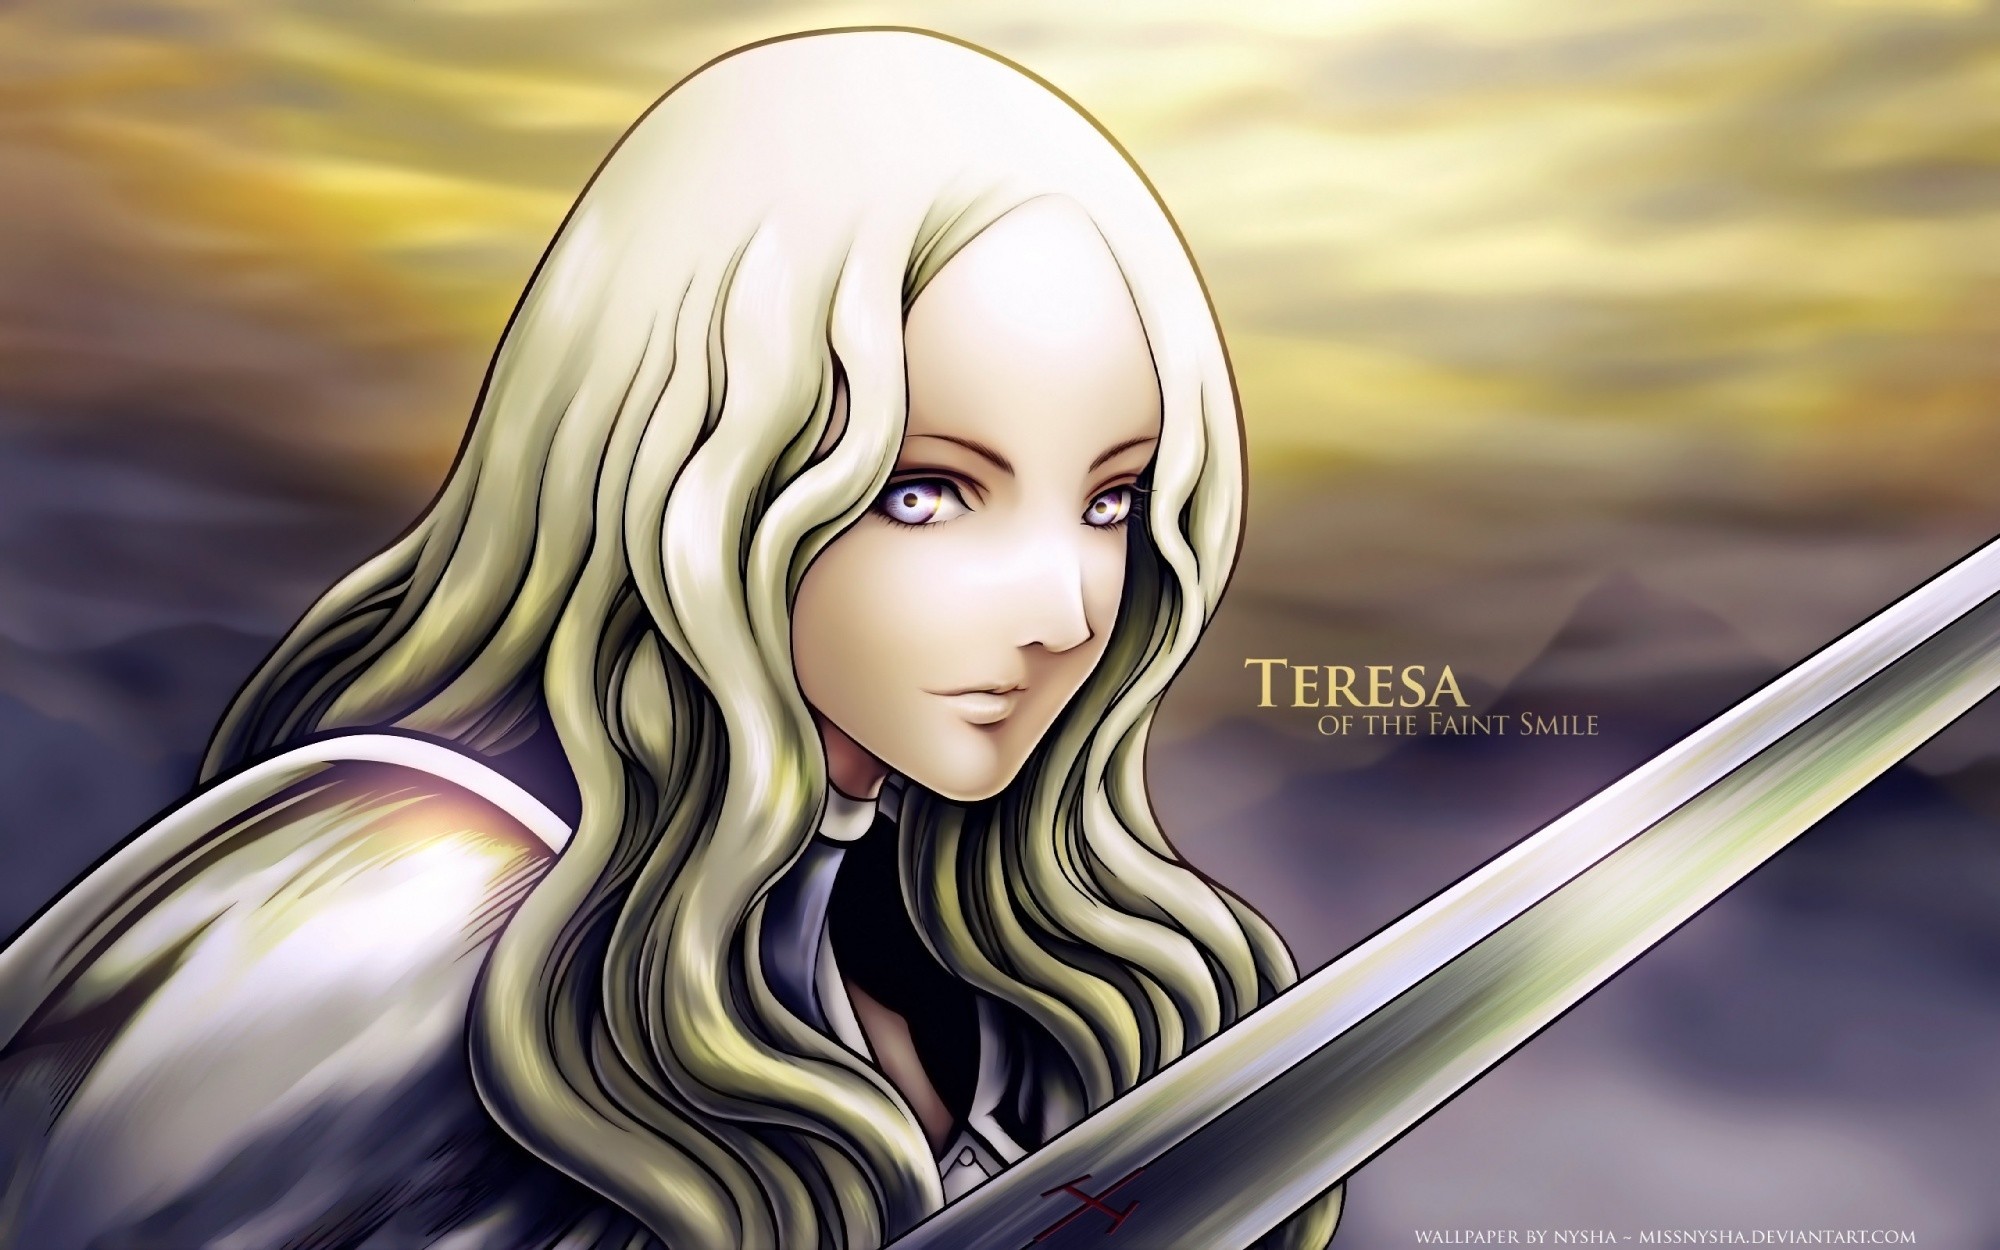 2000x1250 Claymore images teresa HD wallpaper and background photos